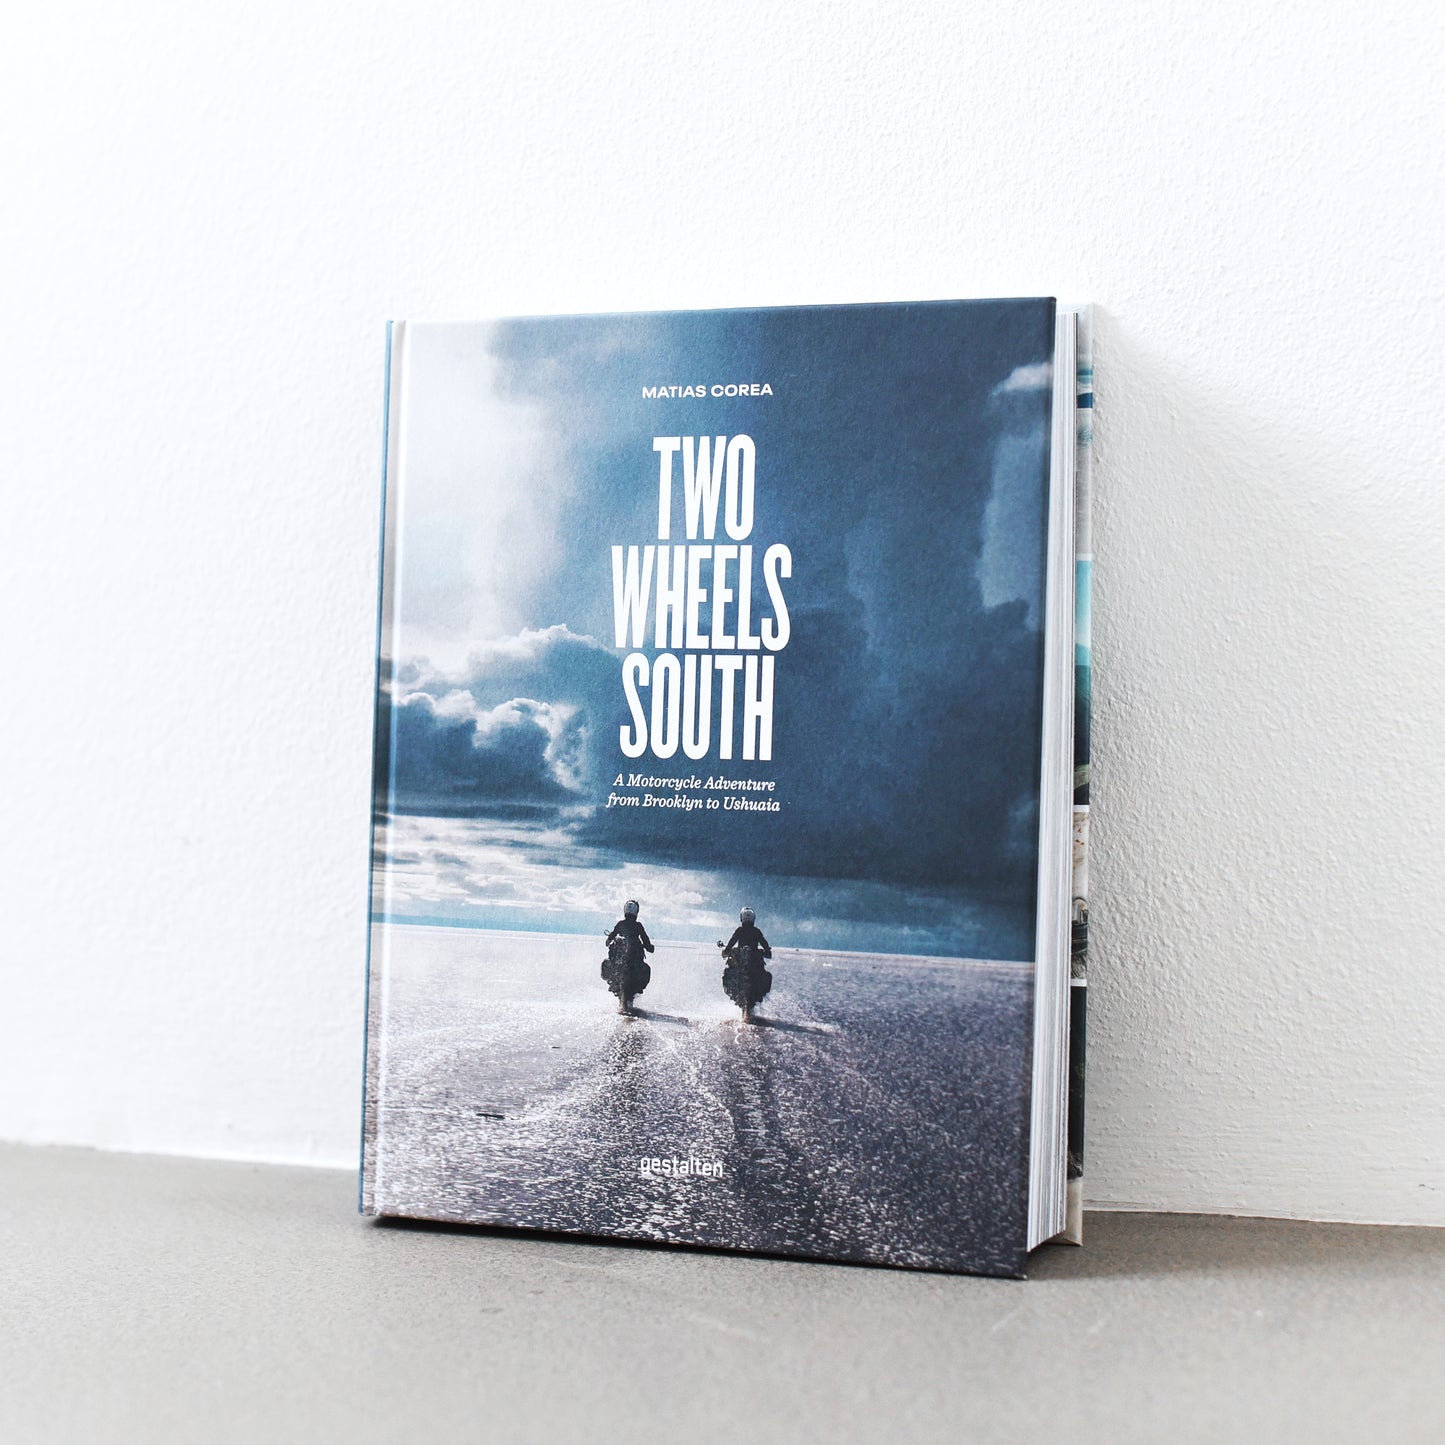 Two Wheels South